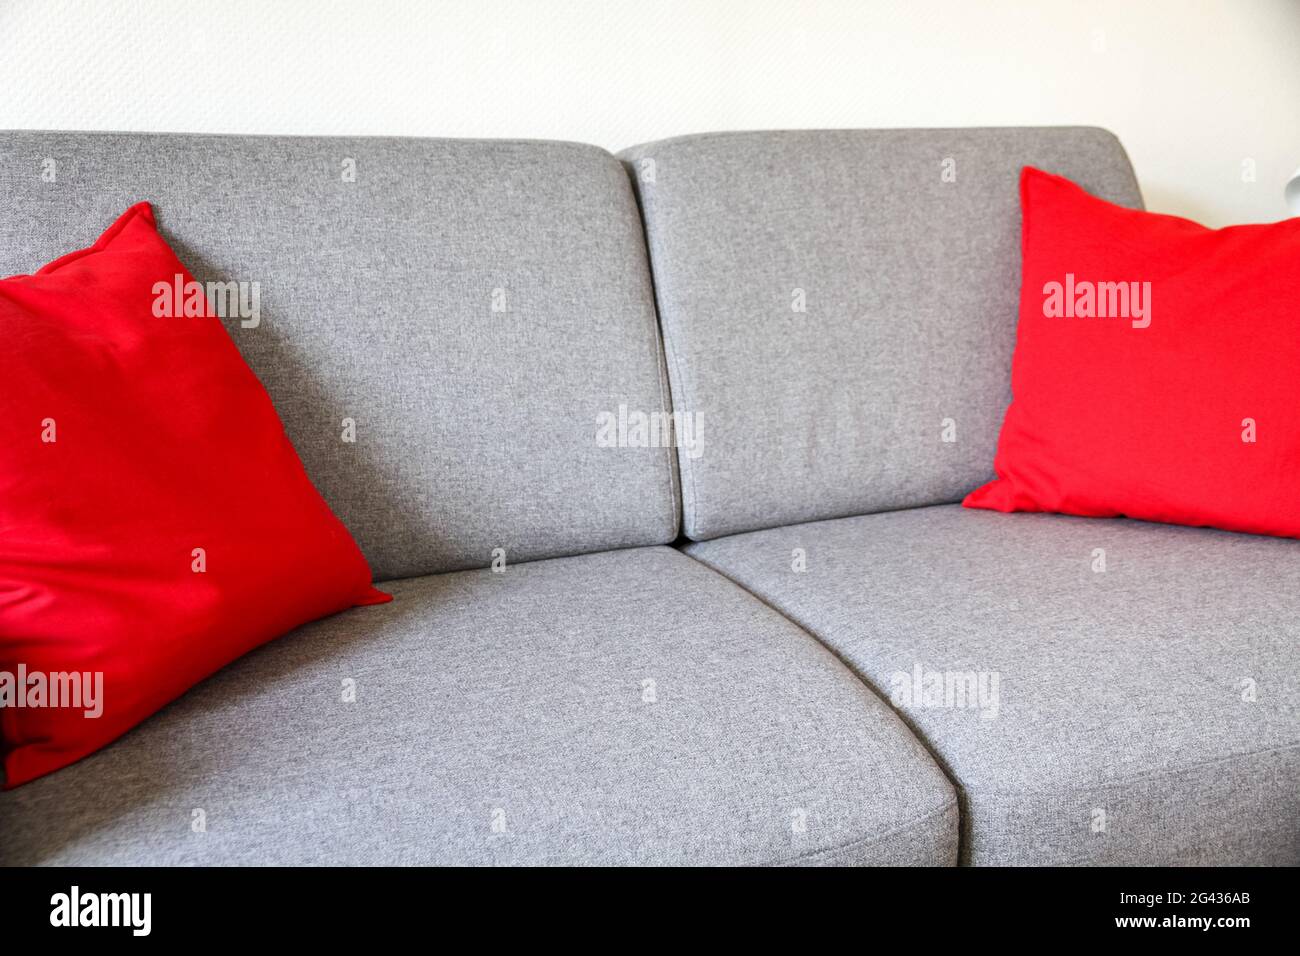 https://c8.alamy.com/comp/2G436AB/grey-sofa-close-up-view-with-red-cushions-2G436AB.jpg